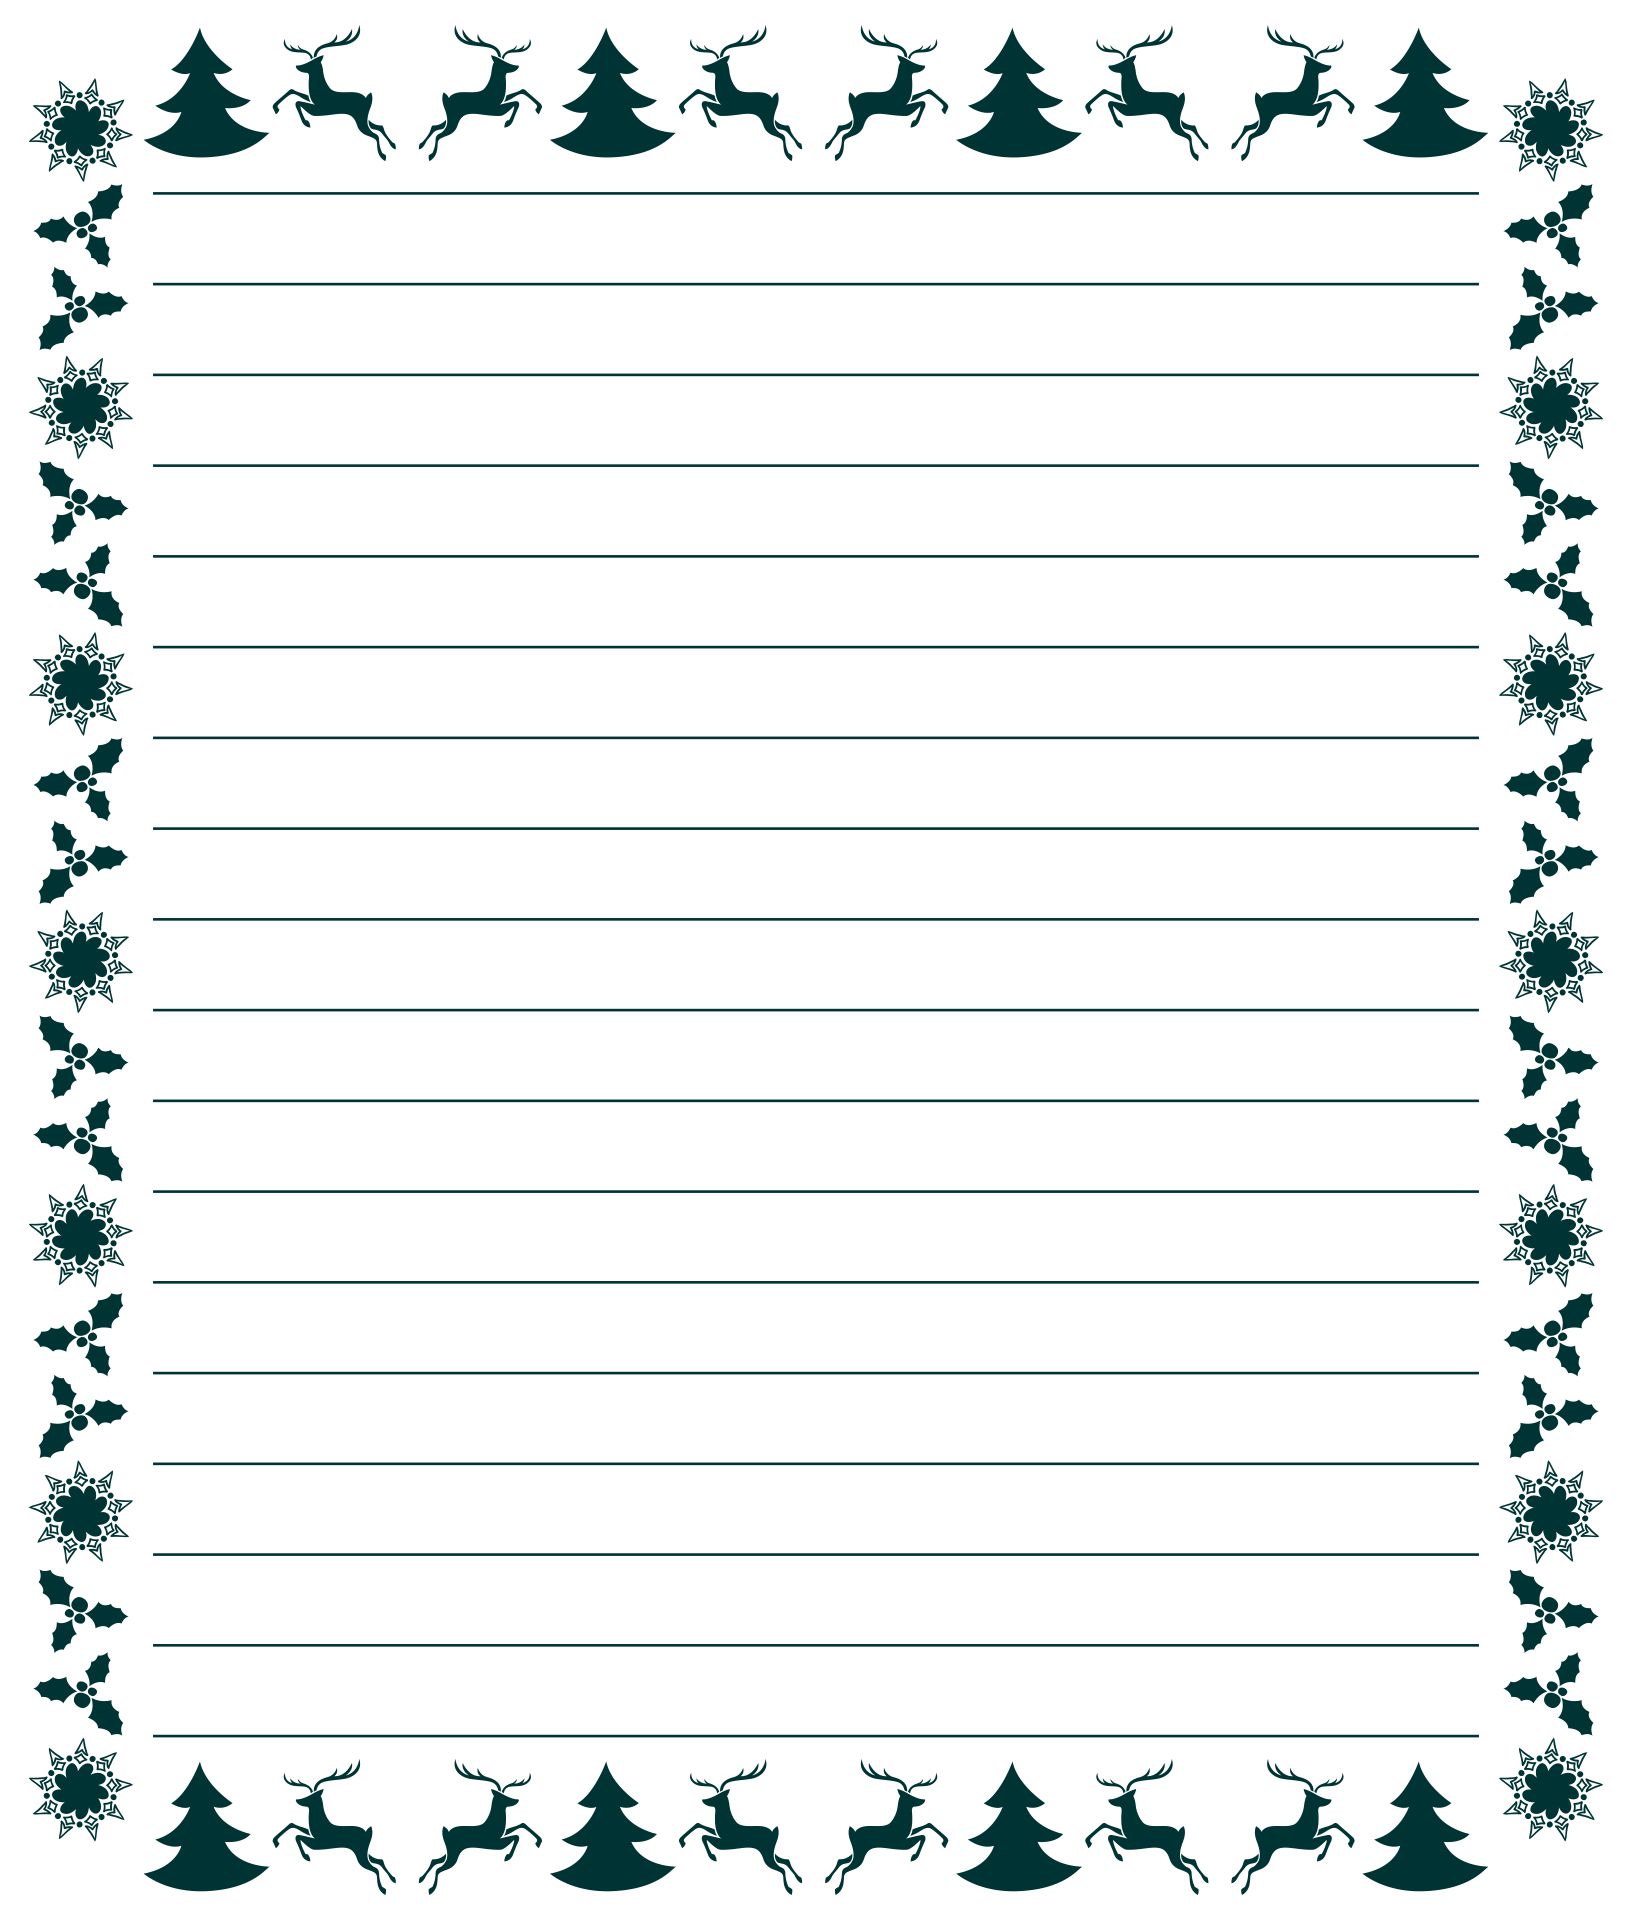 8-best-images-of-lined-paper-printable-star-border-free-printable-lined-writing-paper-with